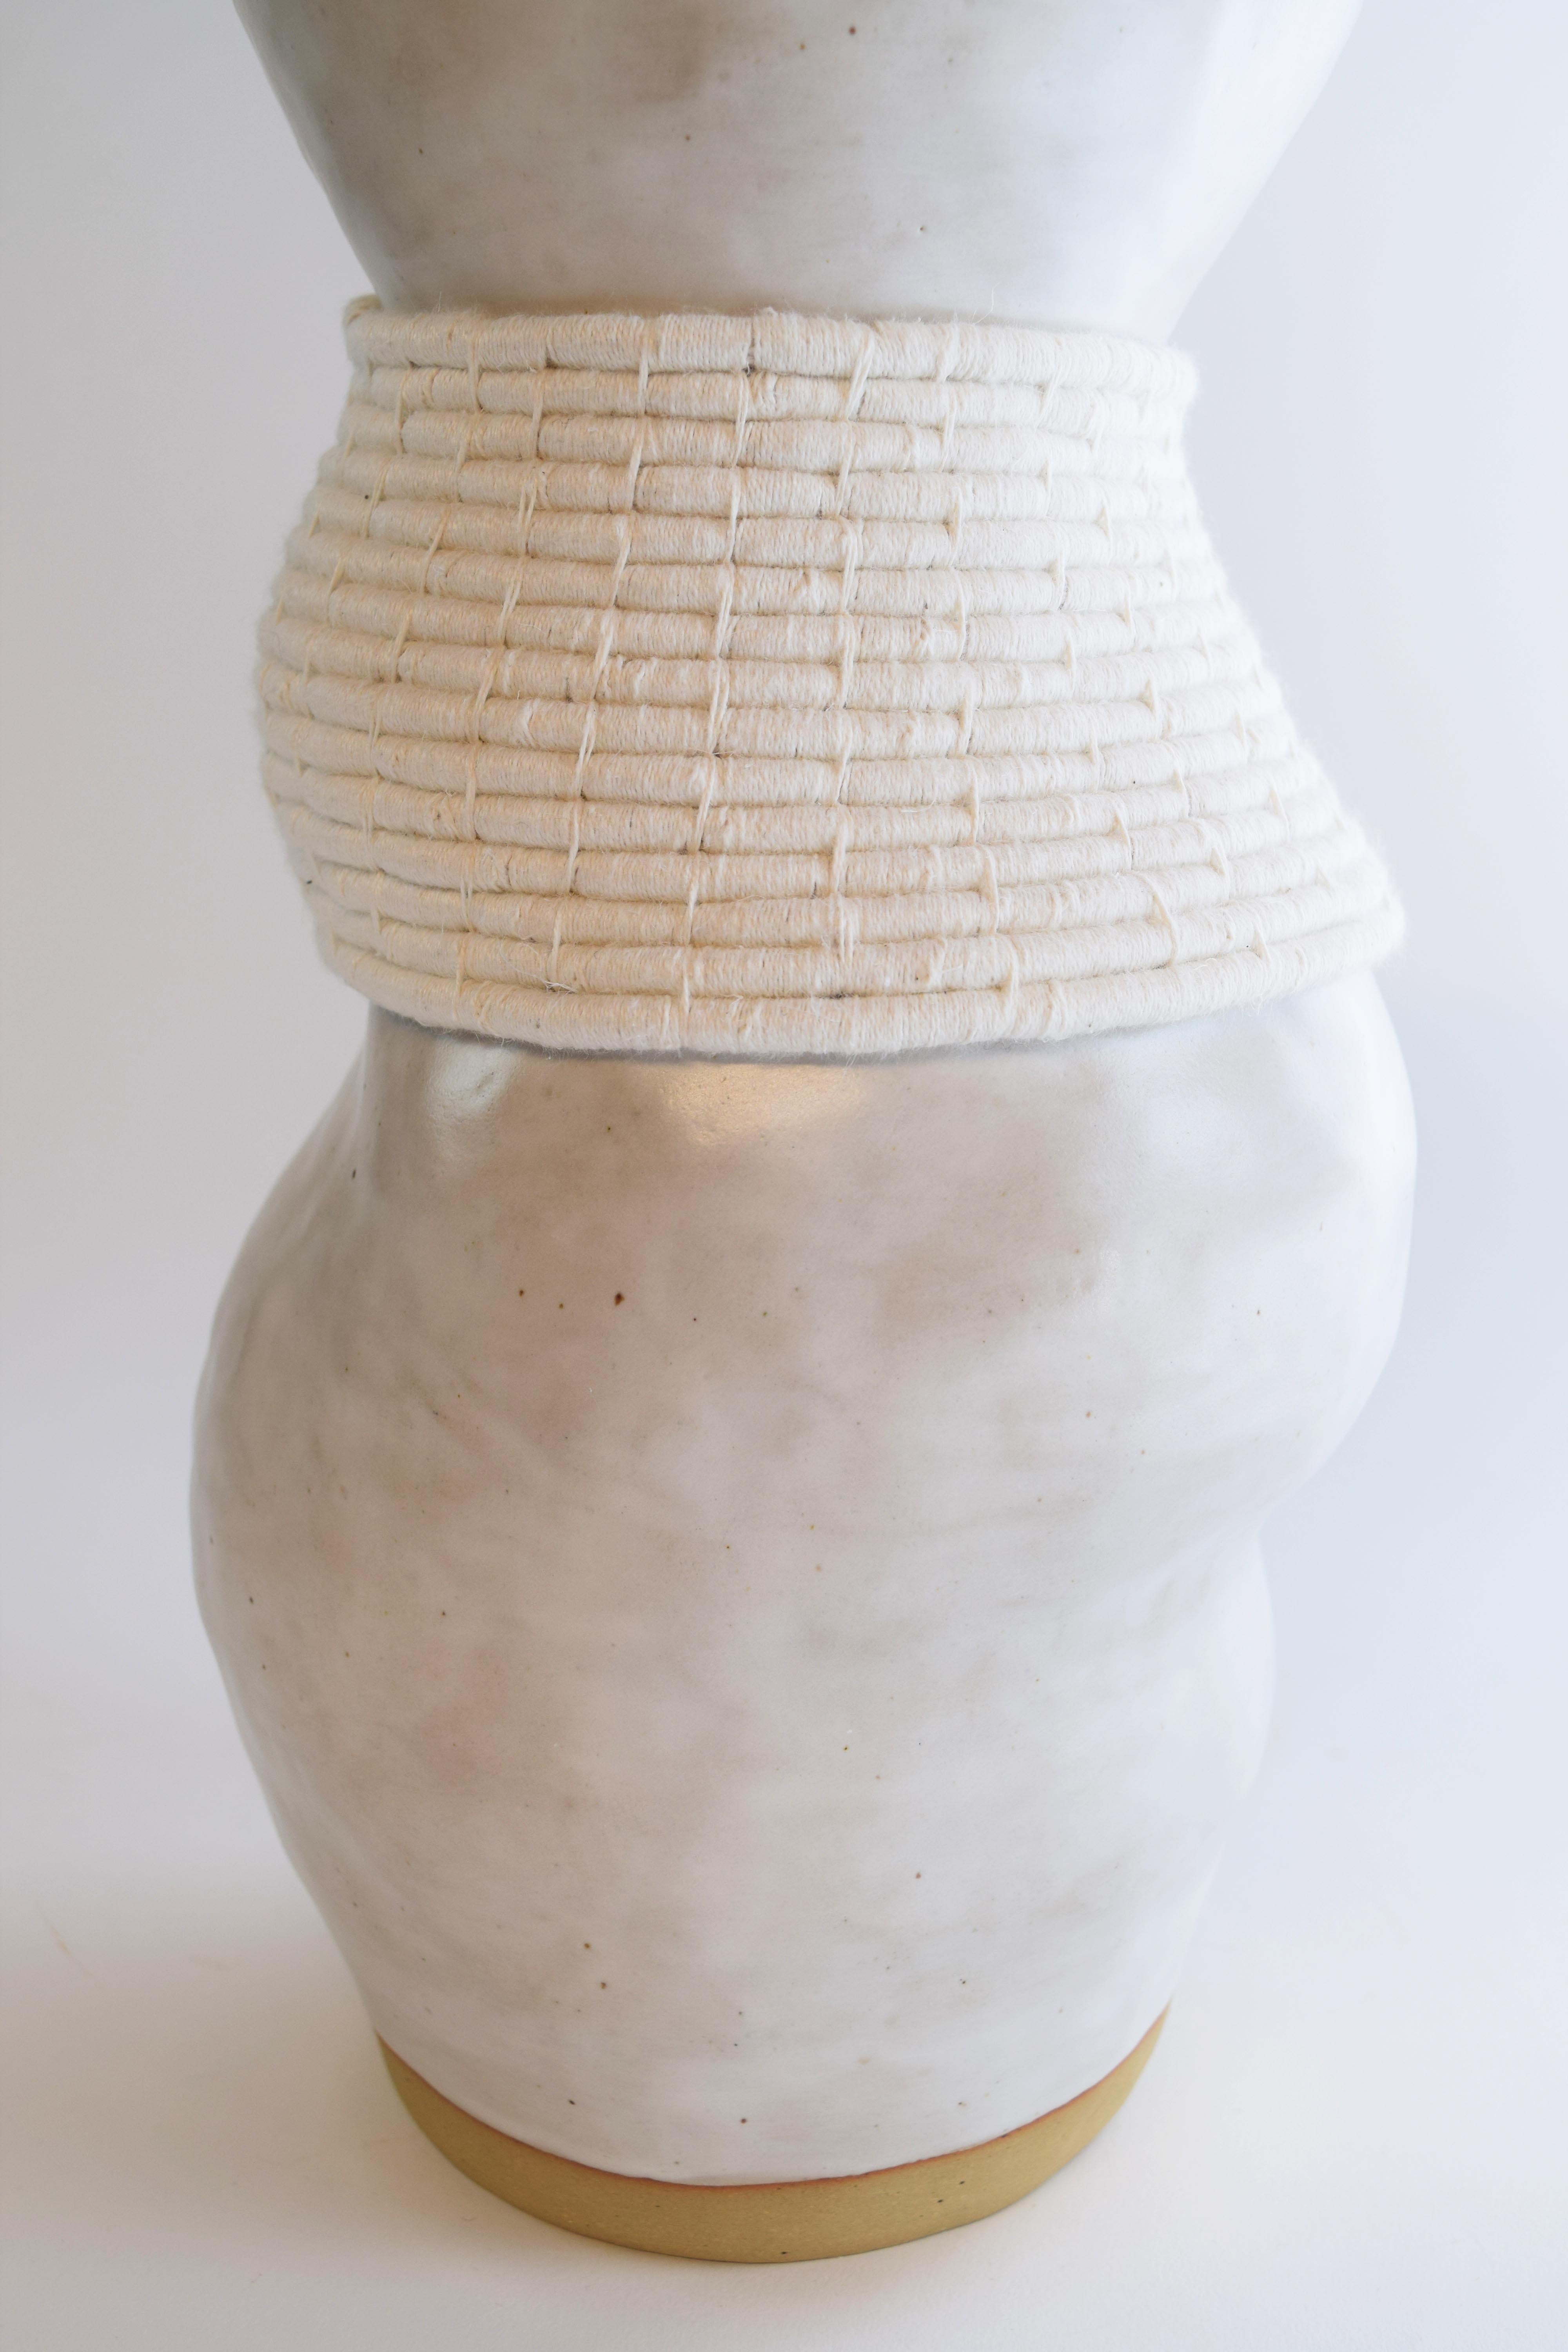 Hand formed asymmetrical stoneware vessel with satin white glaze. Woven white cotton detailing around the outside. The vase is asymmetrical so each view will be different. Vase is water tight.

Measures: 11.5”H x 6”W

One of a kind collections